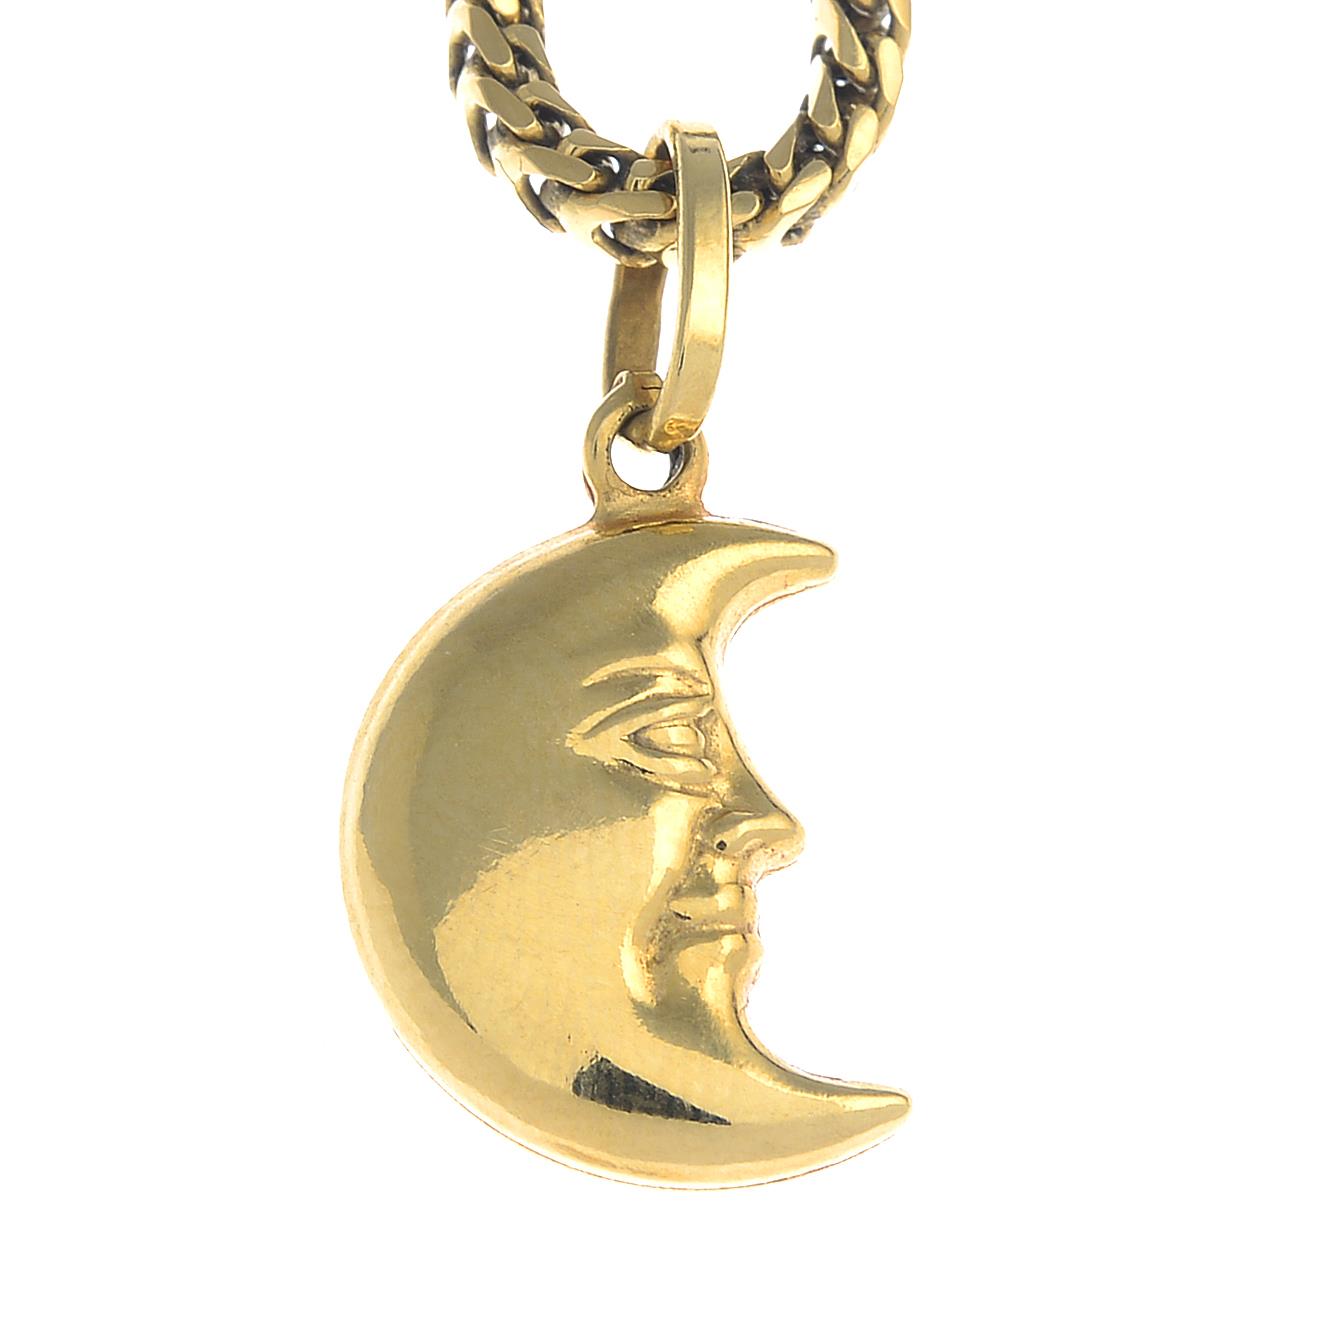 (64812) A crescent pendant, suspended from a chain.